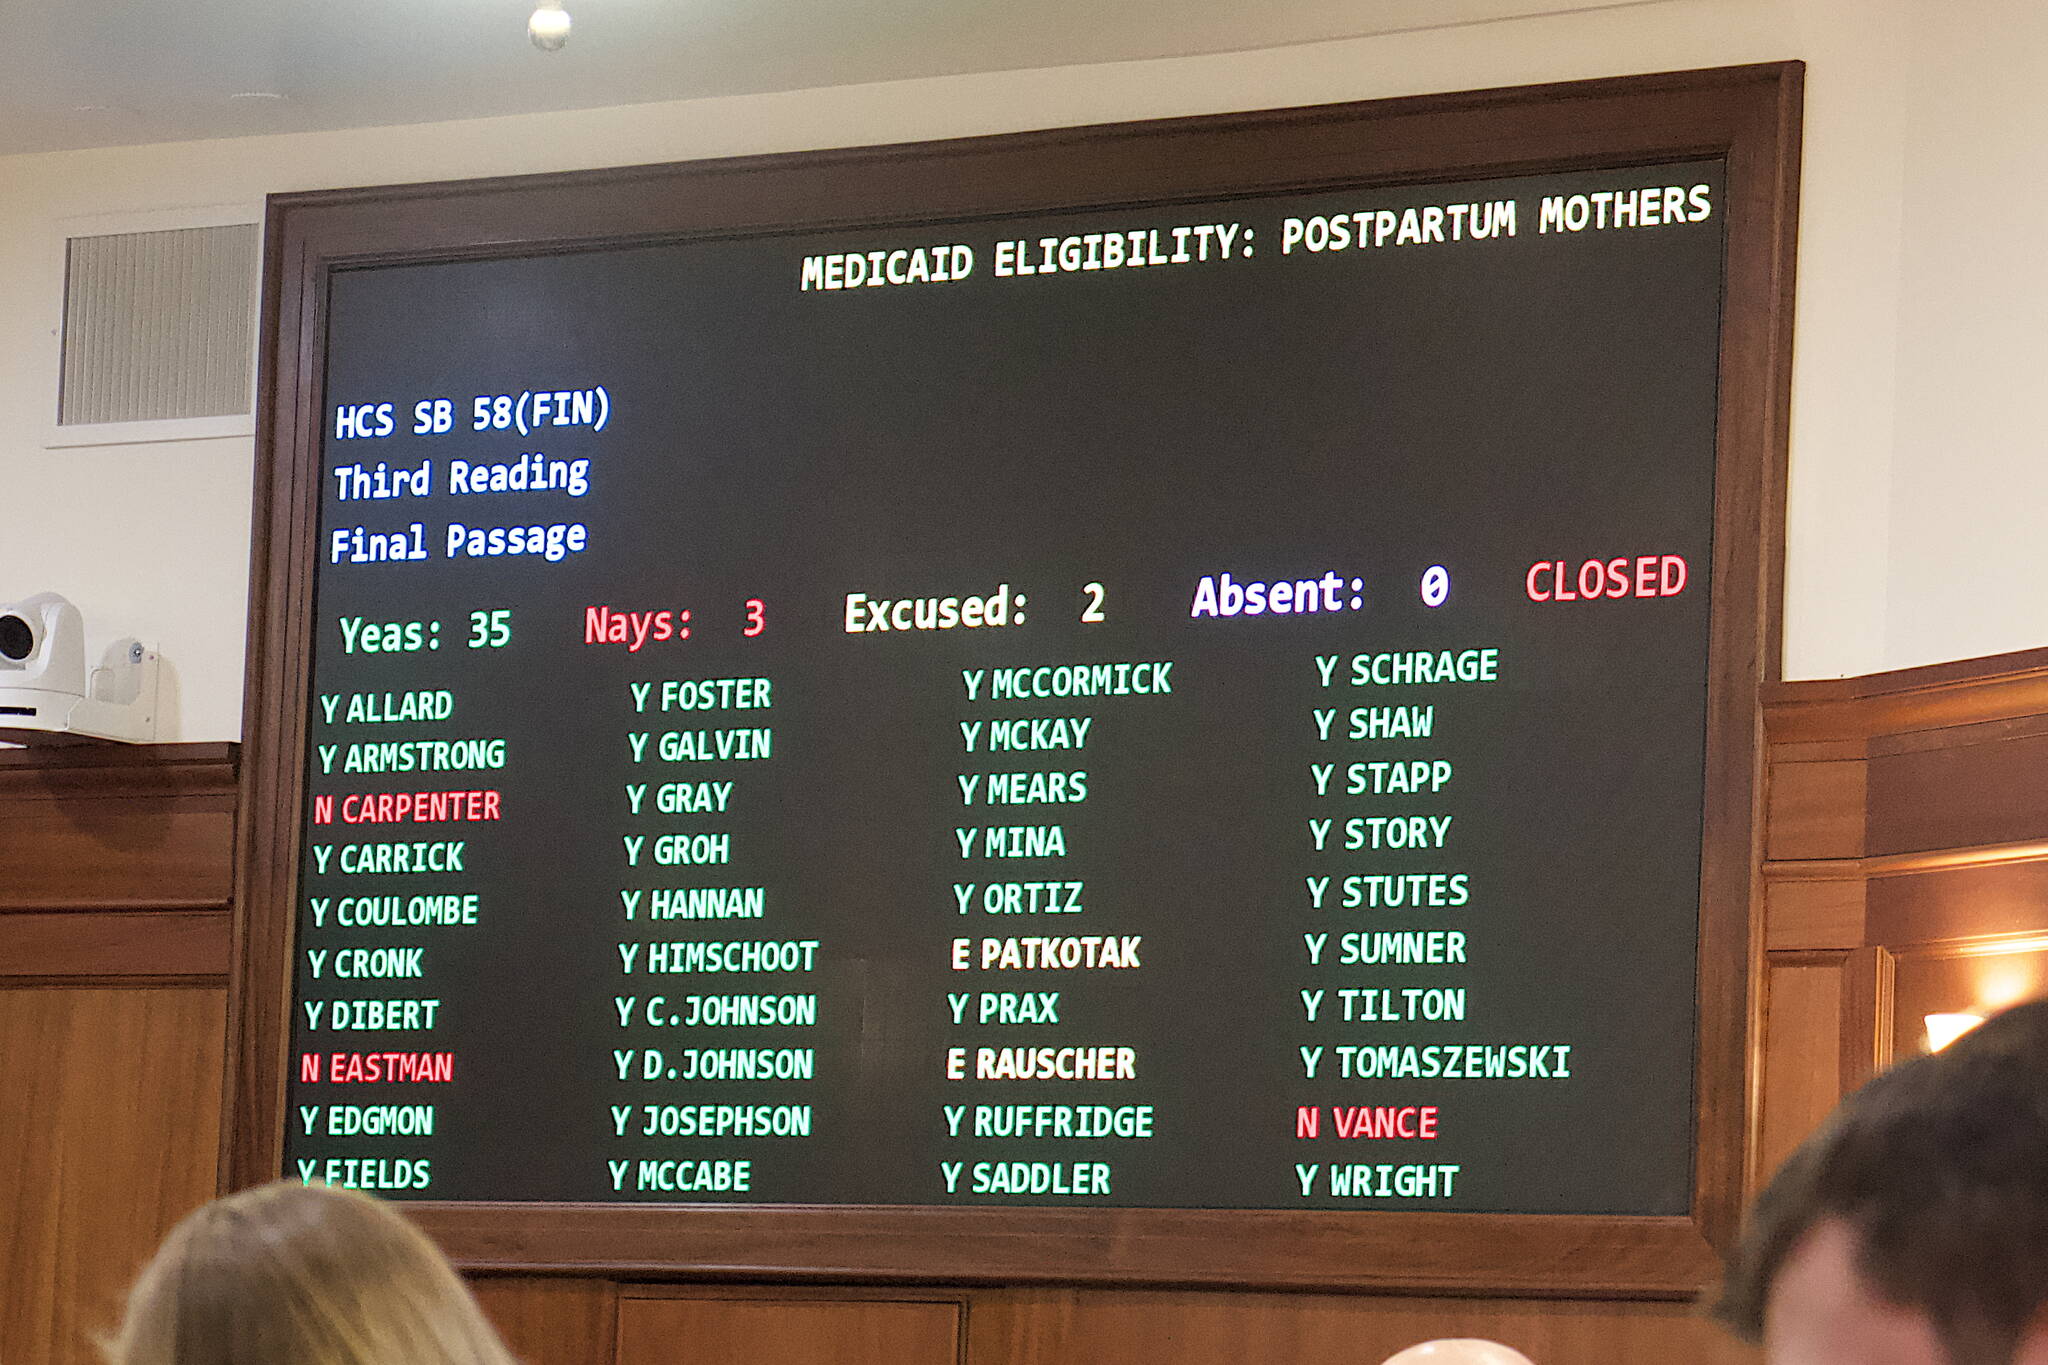 Members of the Alaska State House vote 35-3 to pass a bill Wednesday expanding Medicaid coverage for new mothers to 12 months instead of 60 days. The Senate has already passed the bill, but must concur with House changes before it is sent to Gov. Mike Dunleavy, who introduced the bill. (Mark Sabbatini / Juneau Empire)